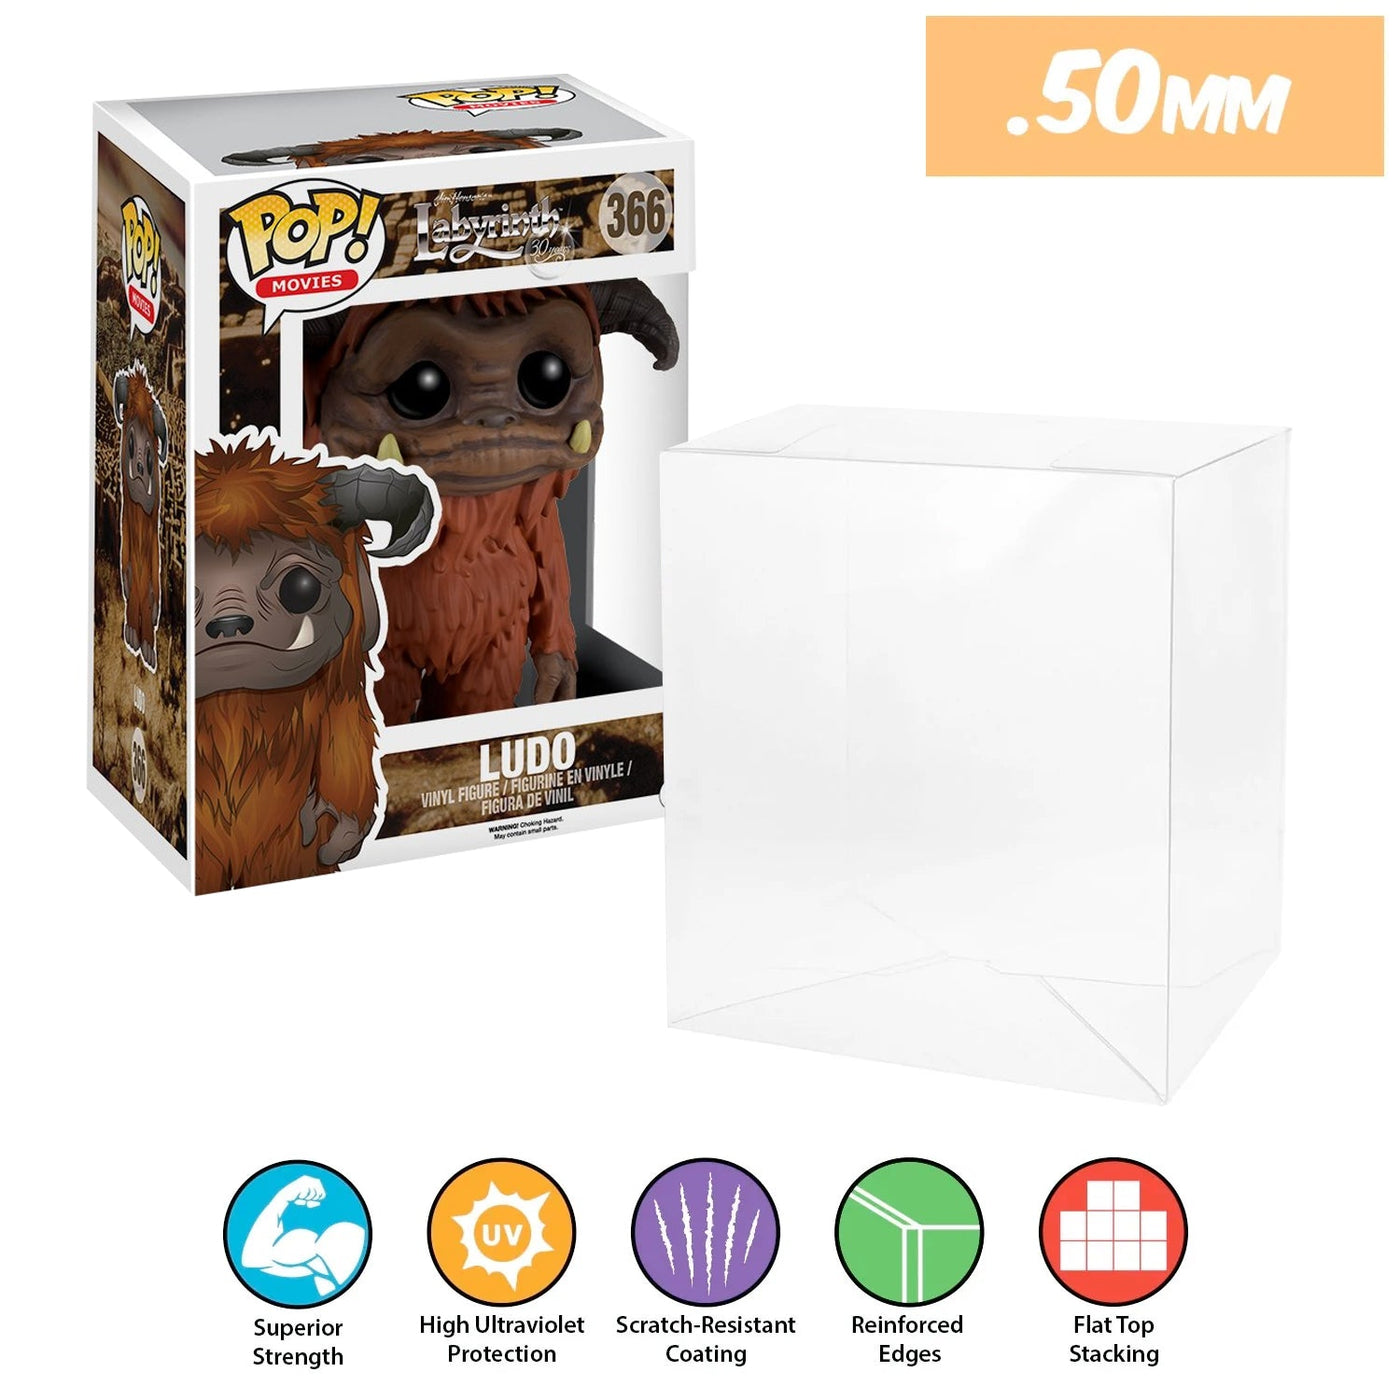 labyrinth ludo 6 inch best funko pop protectors thick strong uv scratch flat top stack vinyl display geek plastic shield vaulted eco armor fits collect protect display case kollector protector